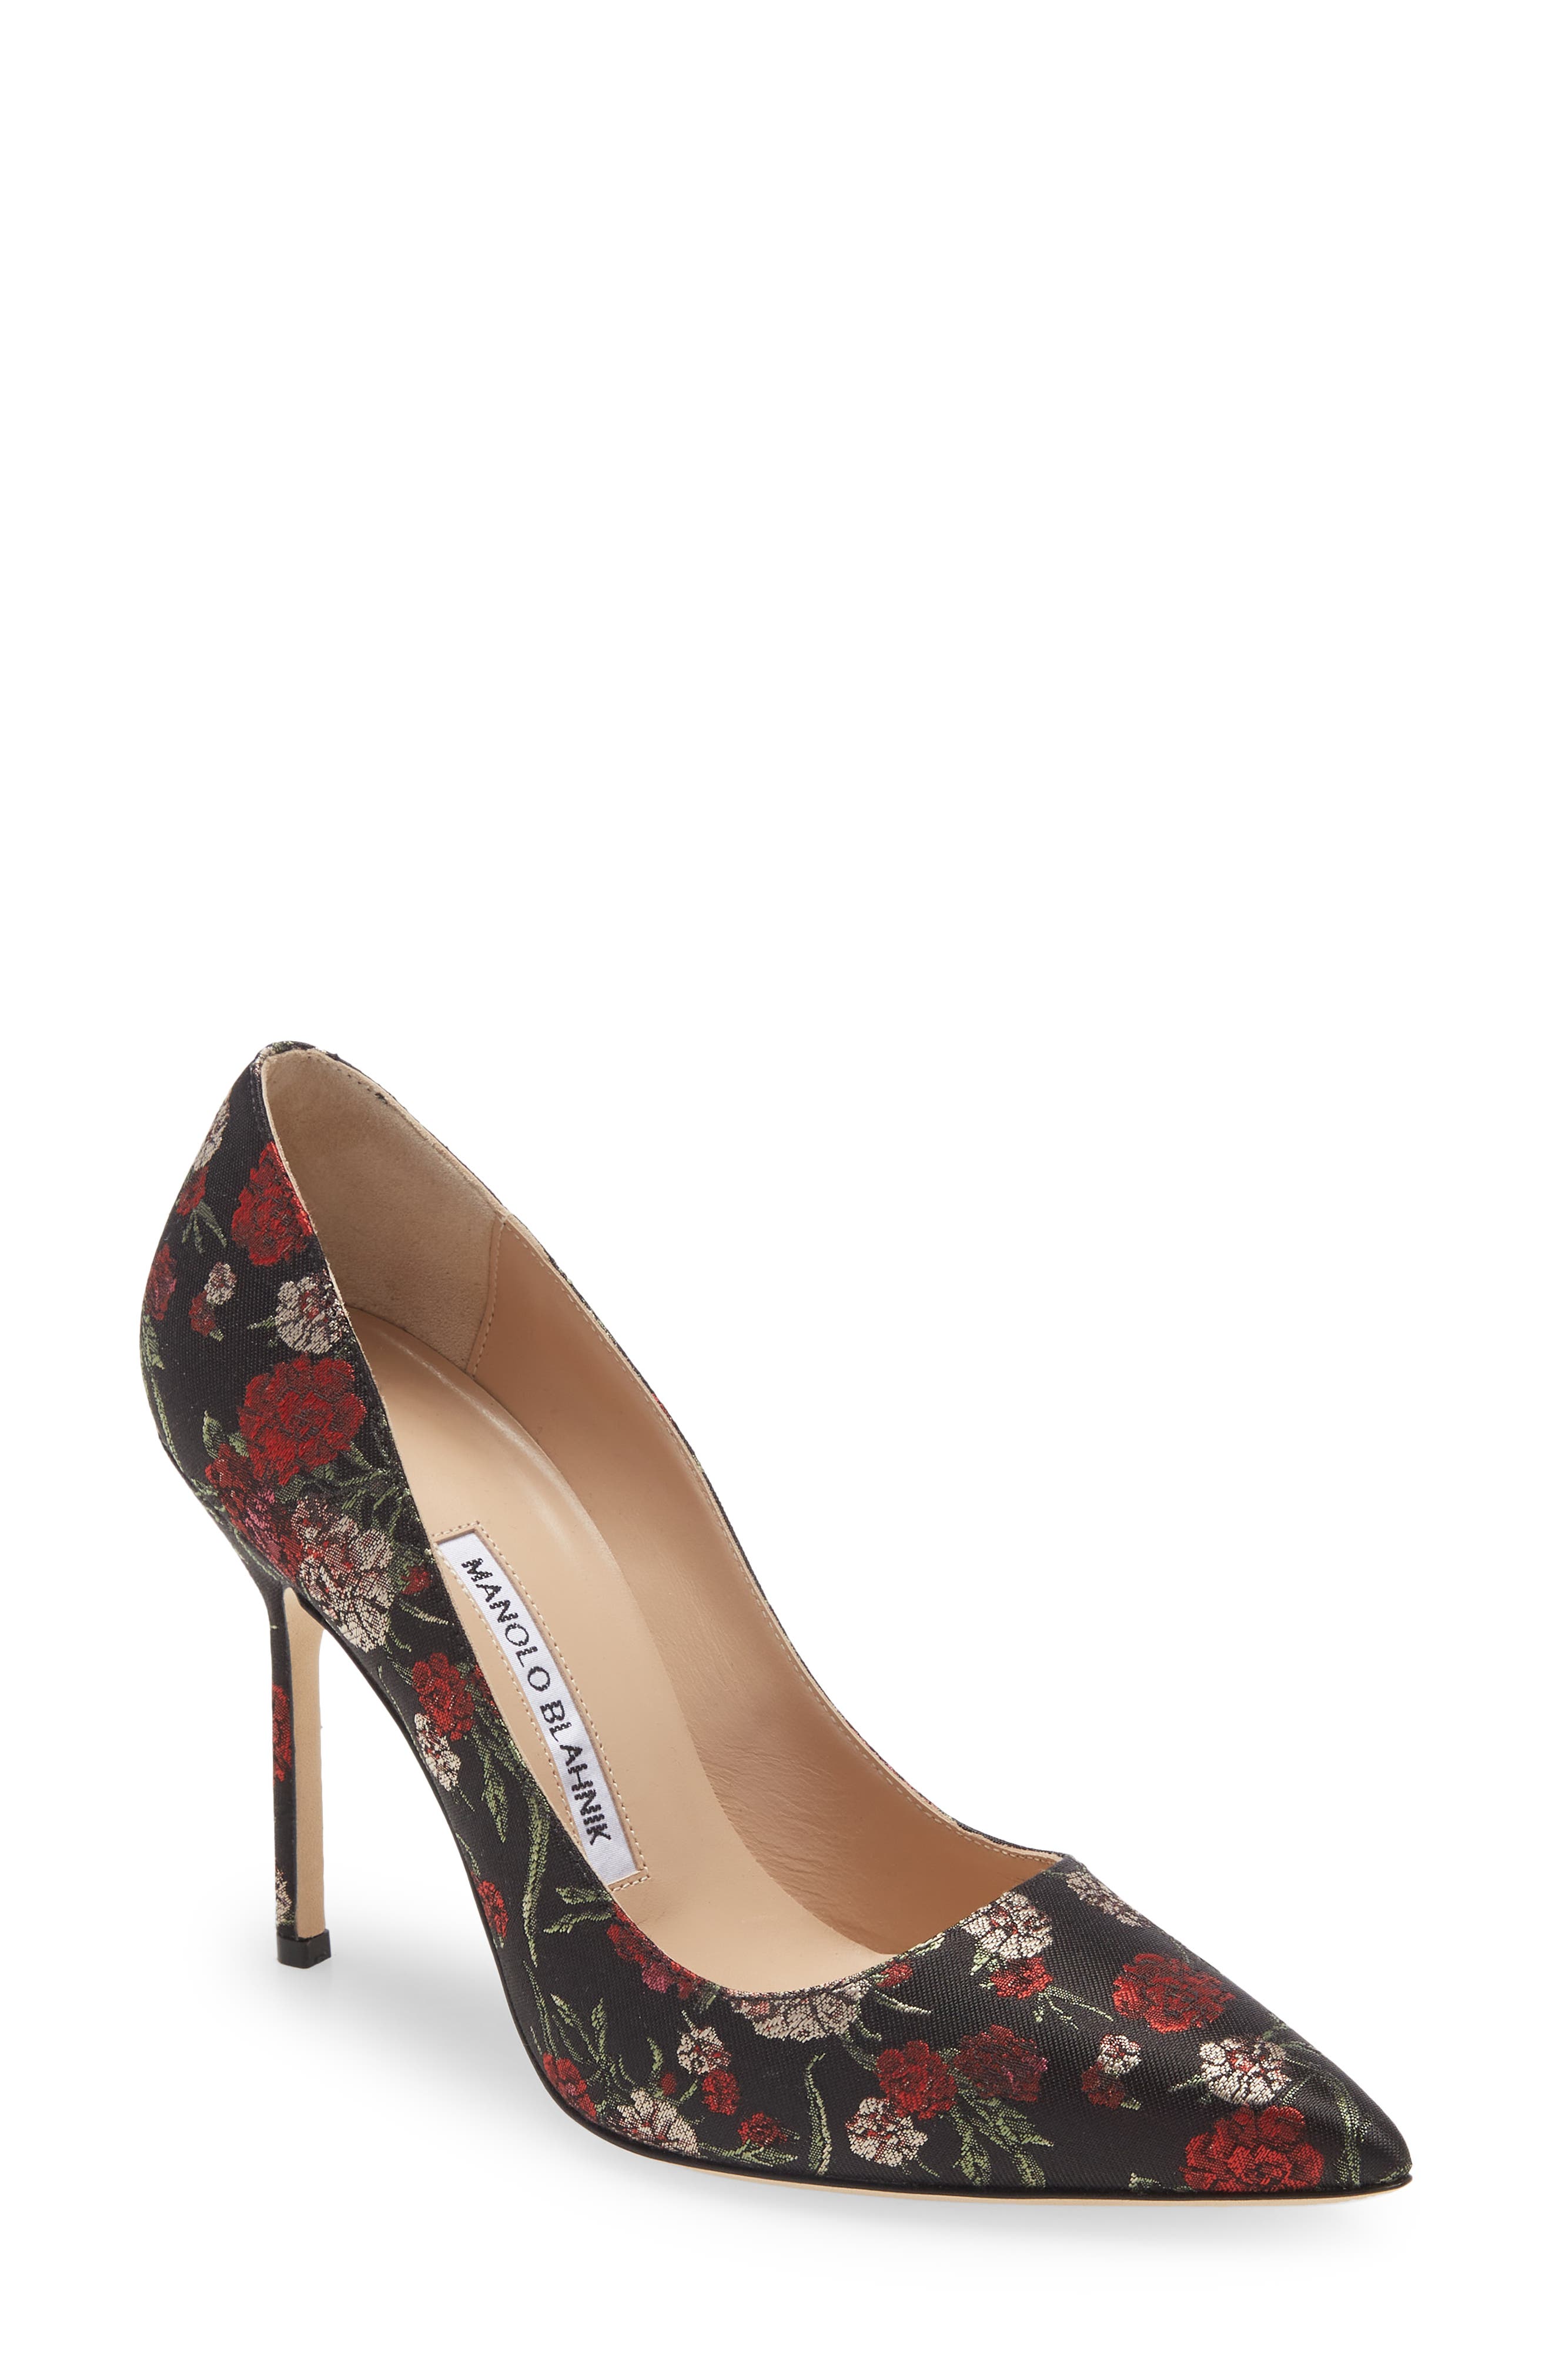 Manolo Blahnik BB Floral Pointed Toe Pump in Black at Nordstrom, Size 5.5Us